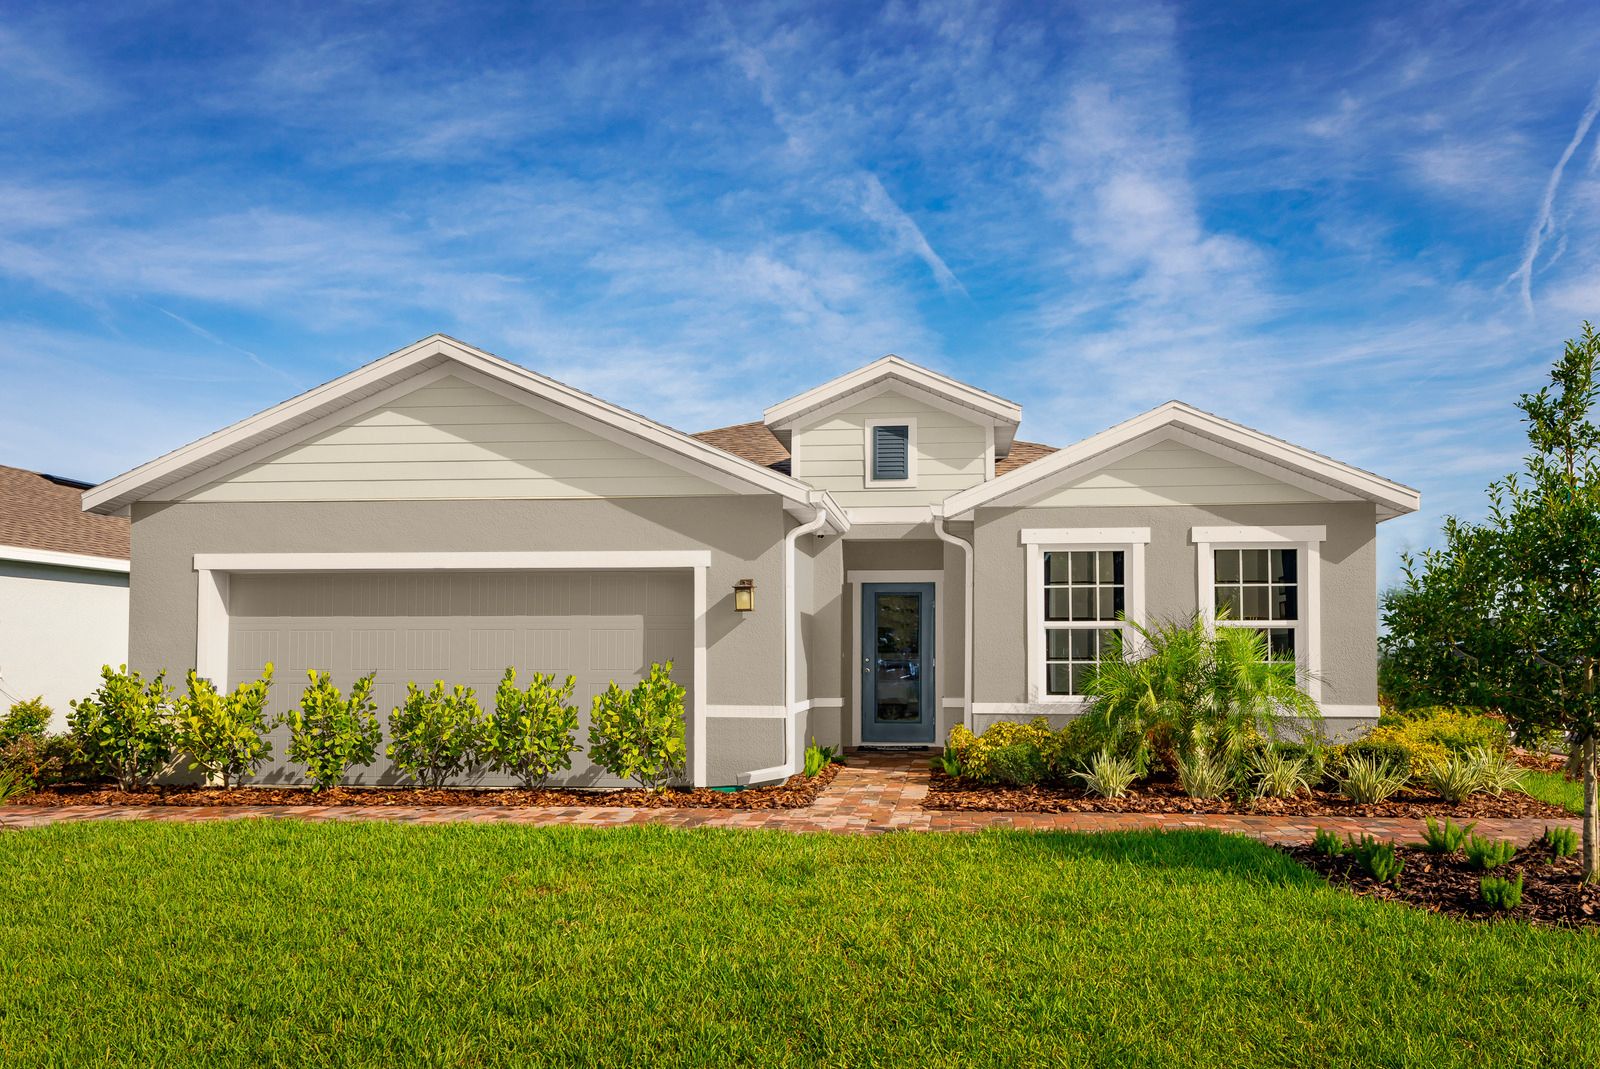 WELCOME HOME TO CYPRESS PRESERVE IN LAND O' LAKES, FL